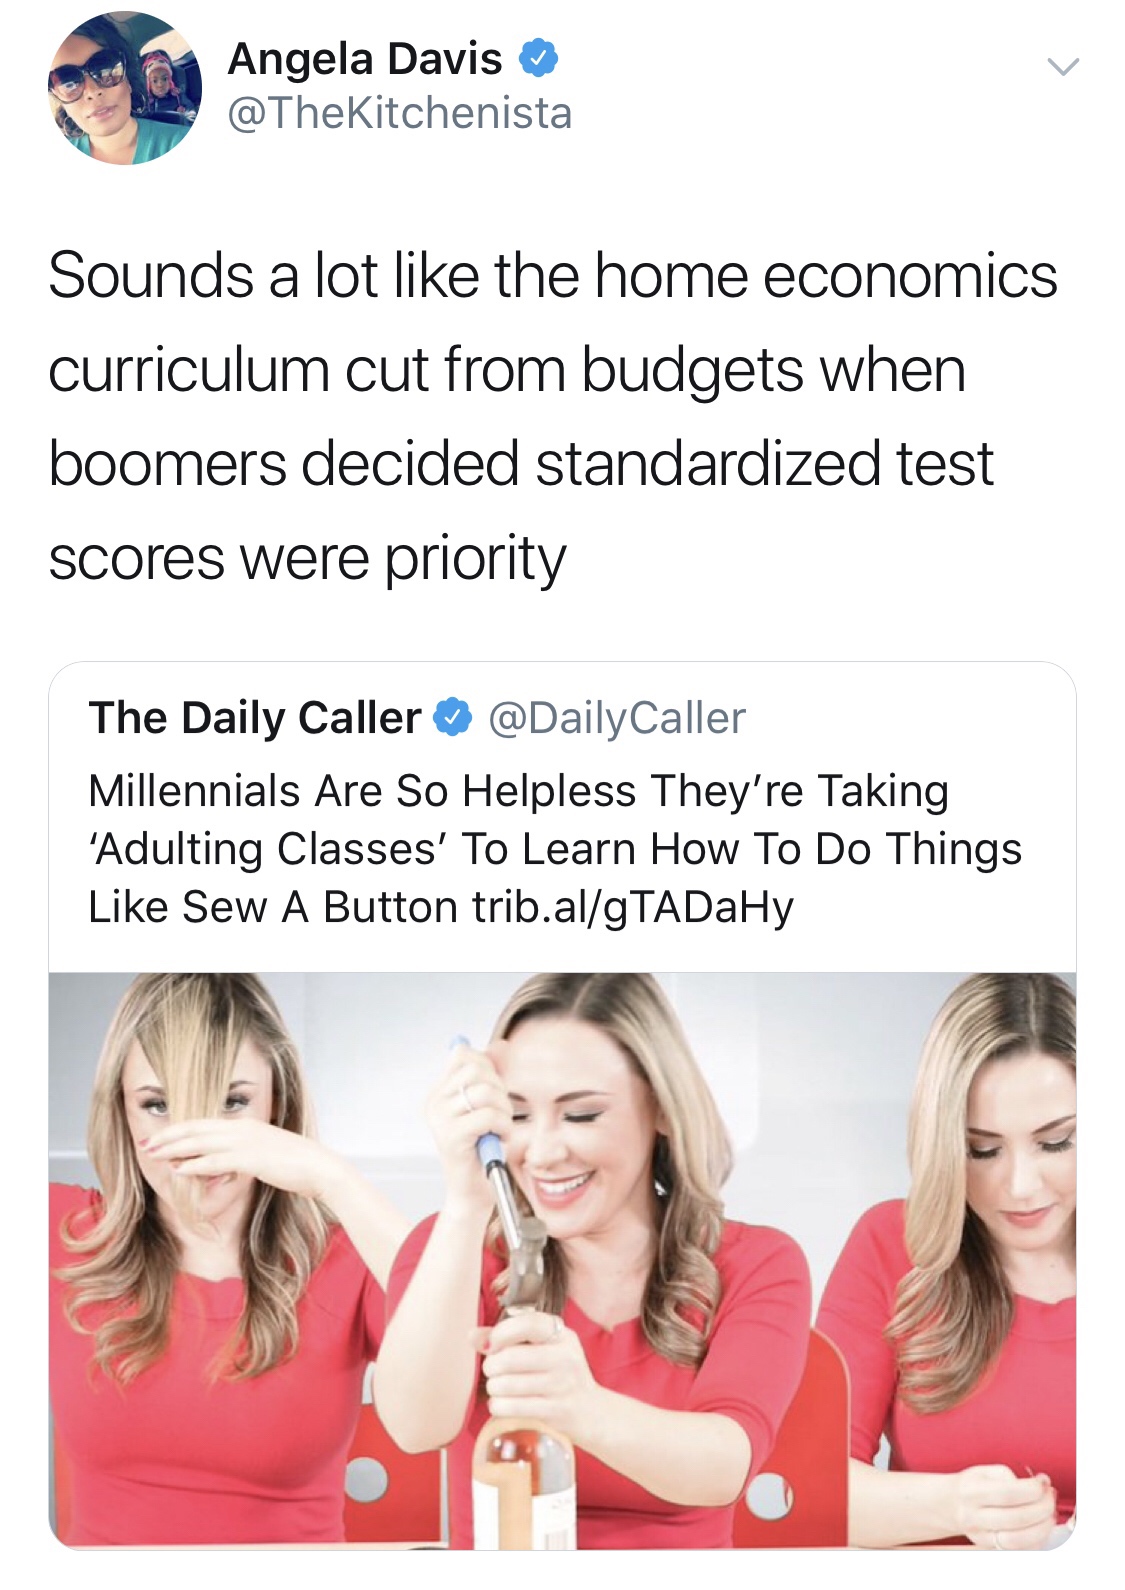 funny meme of millennials are so helpless - Angela Davis Sounds a lot the home economics curriculum cut from budgets when boomers decided standardized test scores were priority The Daily Caller Millennials Are So Helpless They're Taking 'Adulting Classes'